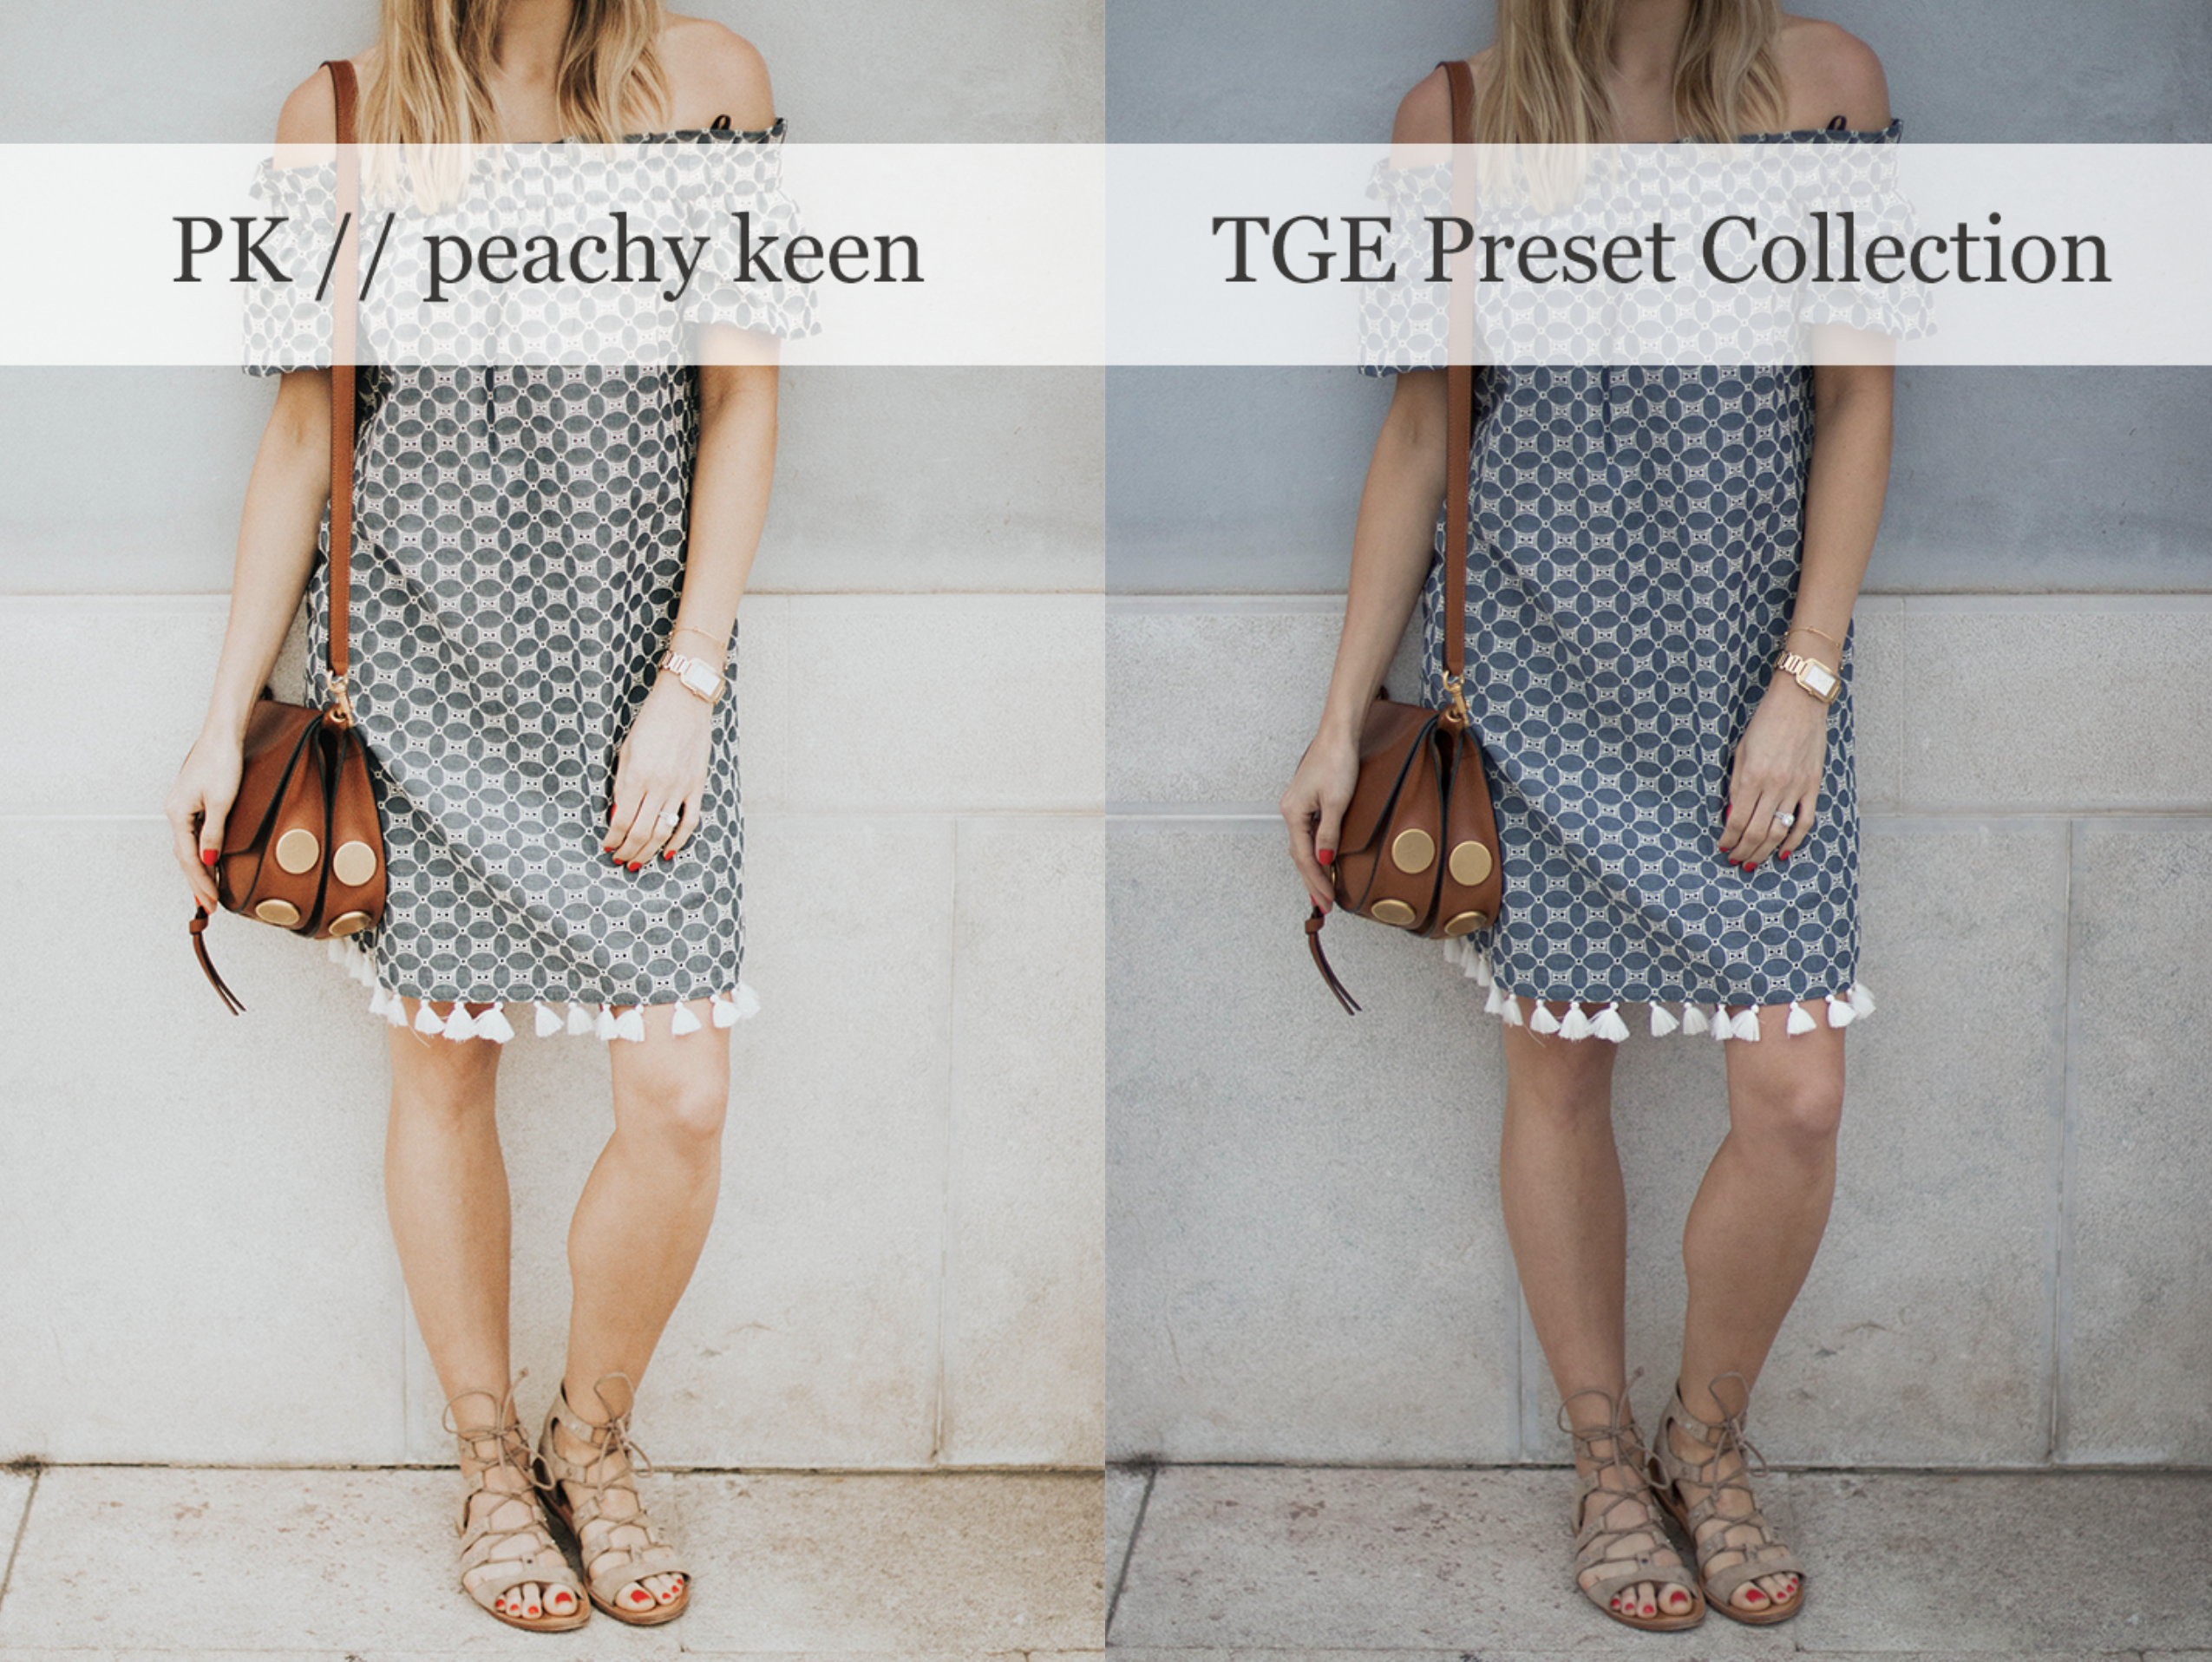 TGE Preset Collection | peachy keen